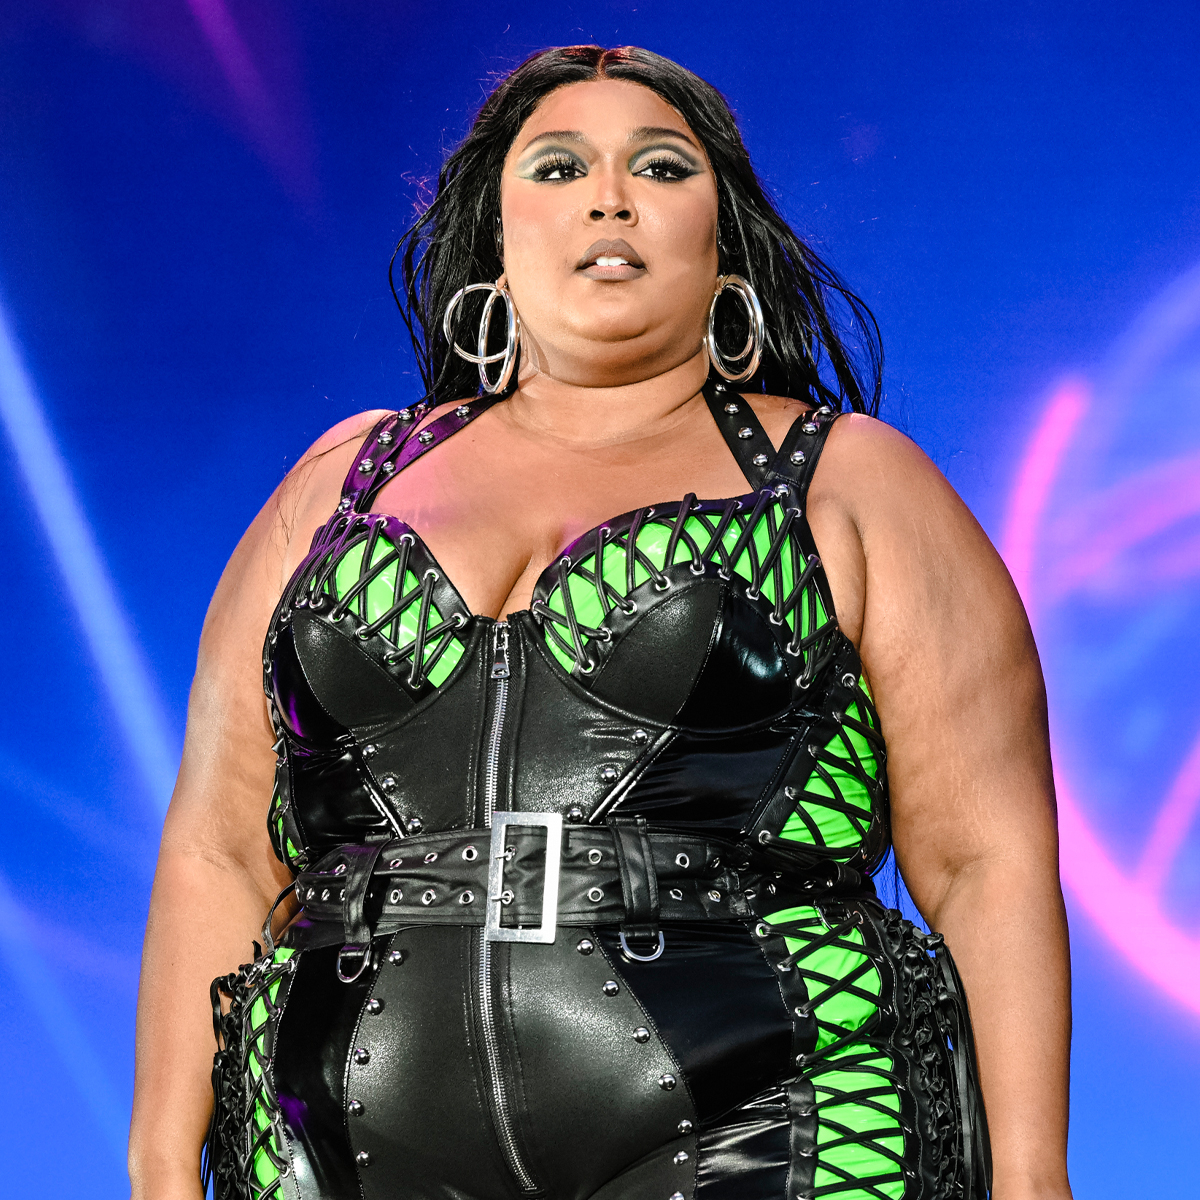 Lizzo Seemingly Quits Hollywood Over “Lies” Told About Her